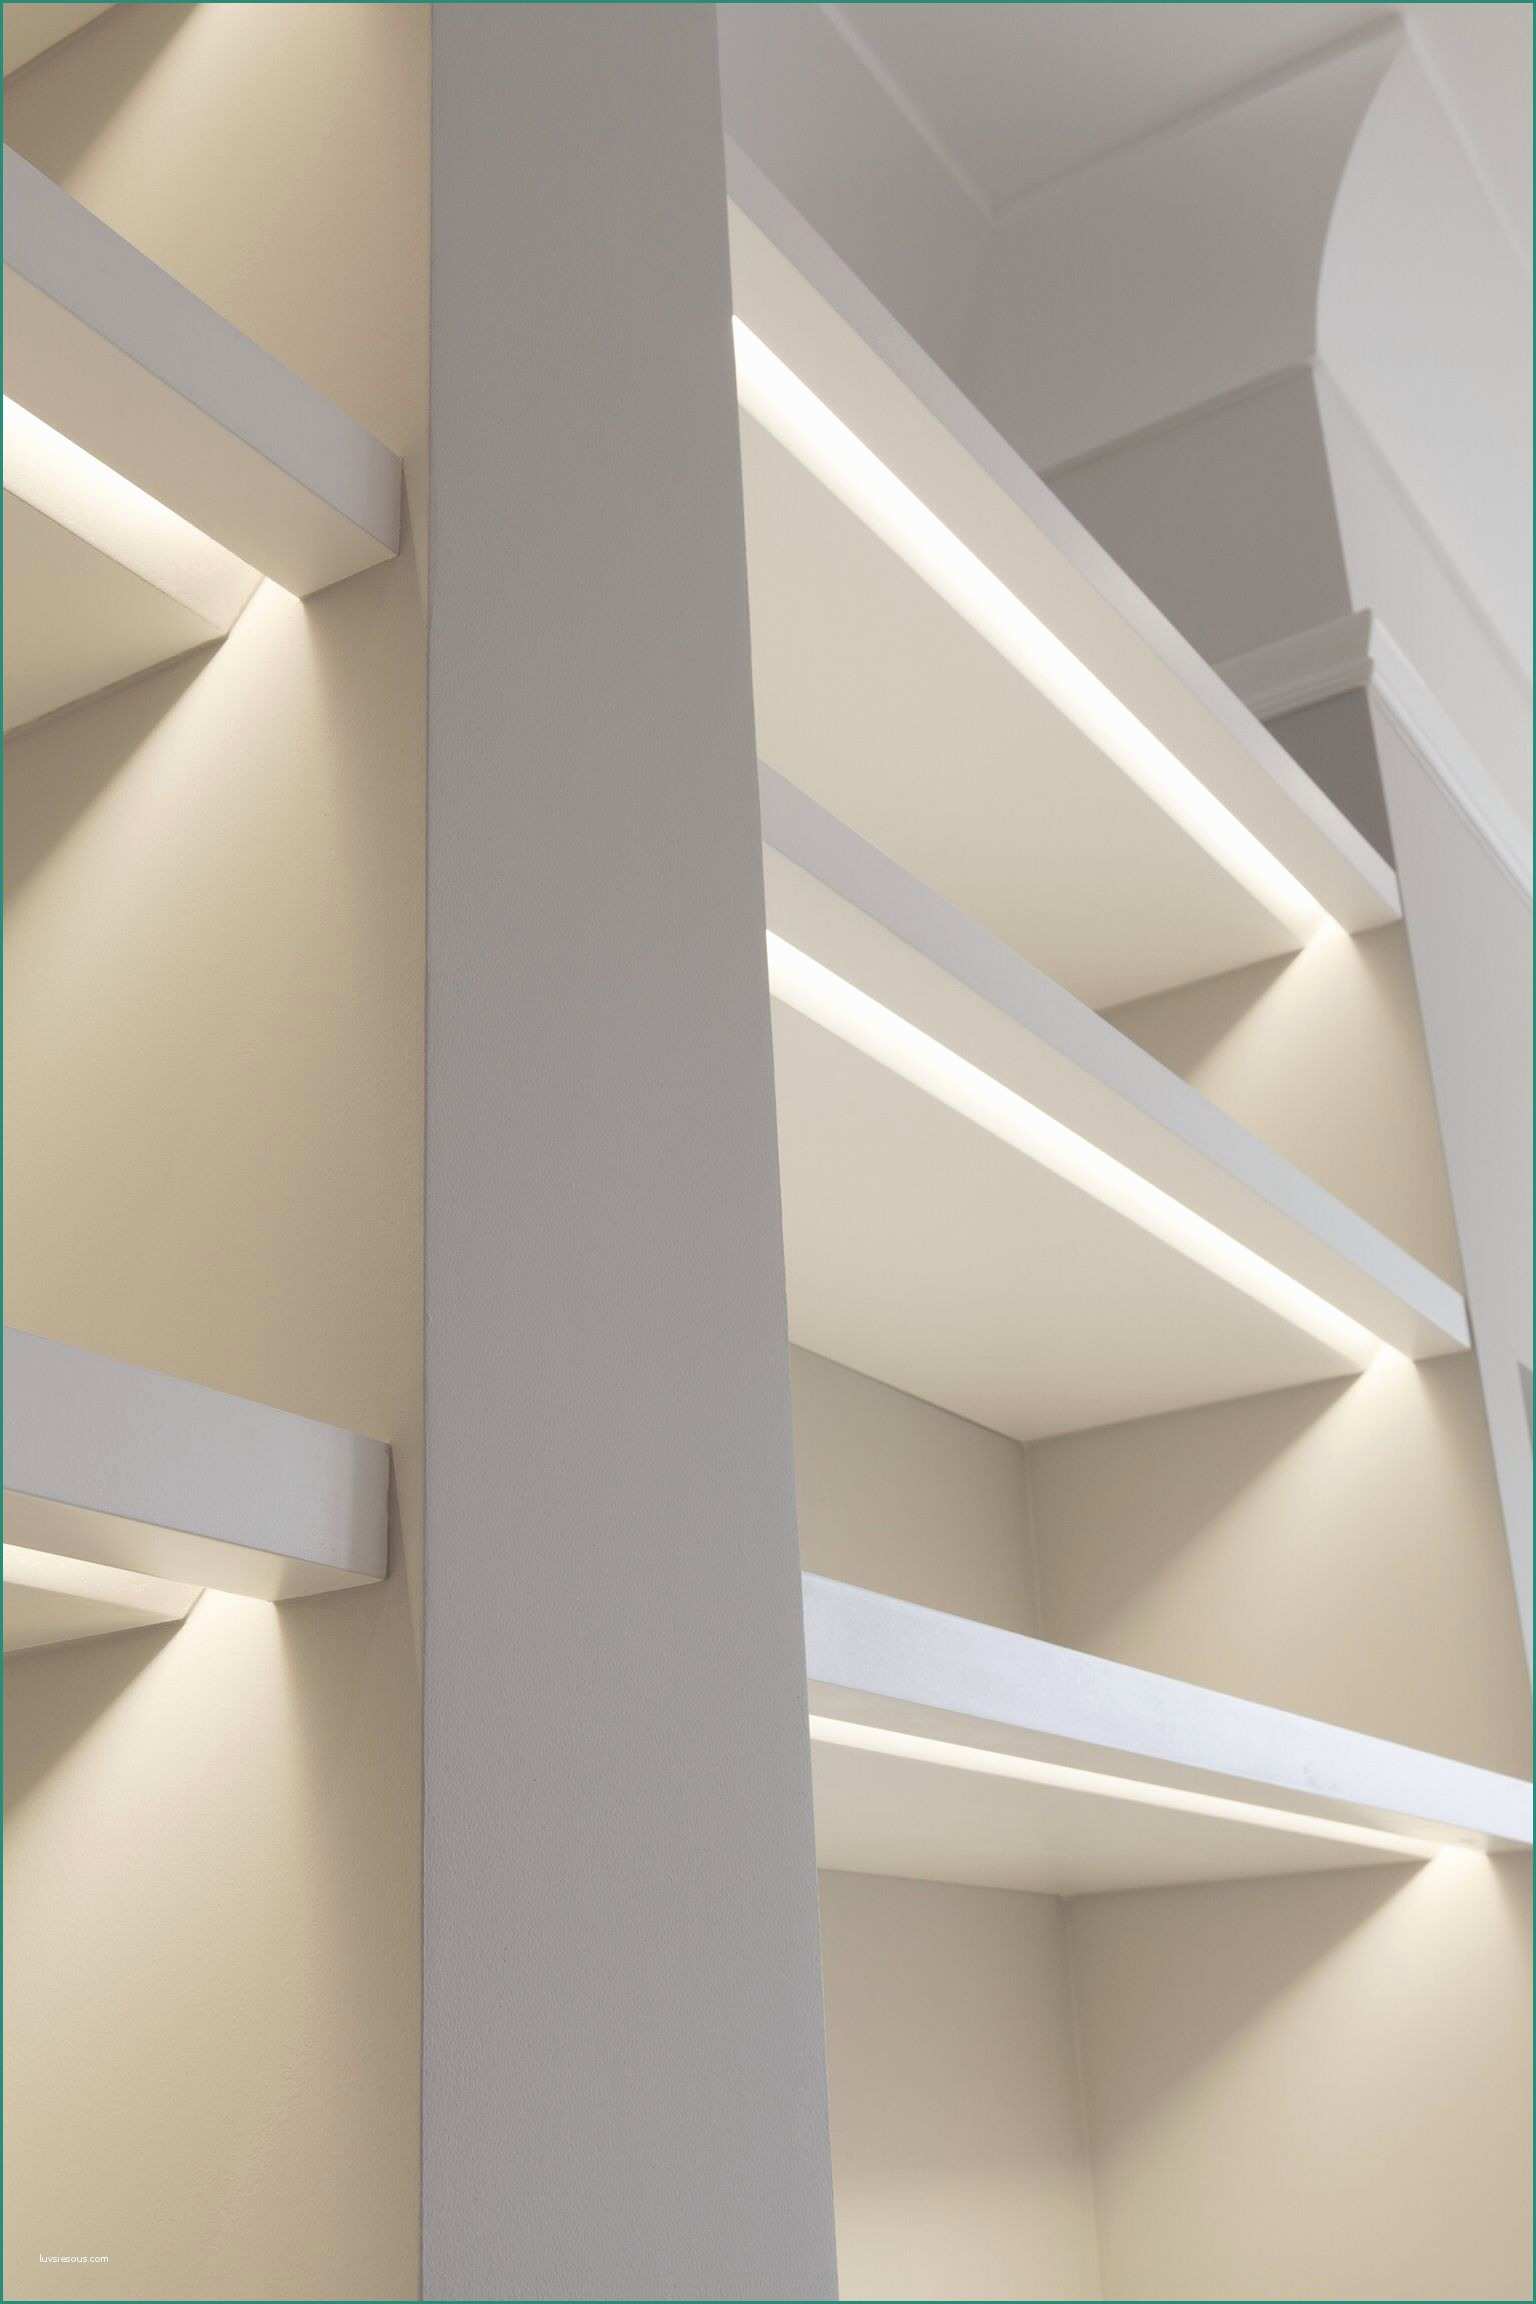 Cabine Armadio Poliform E Shelves Lit with Recessed Lights Note the Bevel to Allow Light to